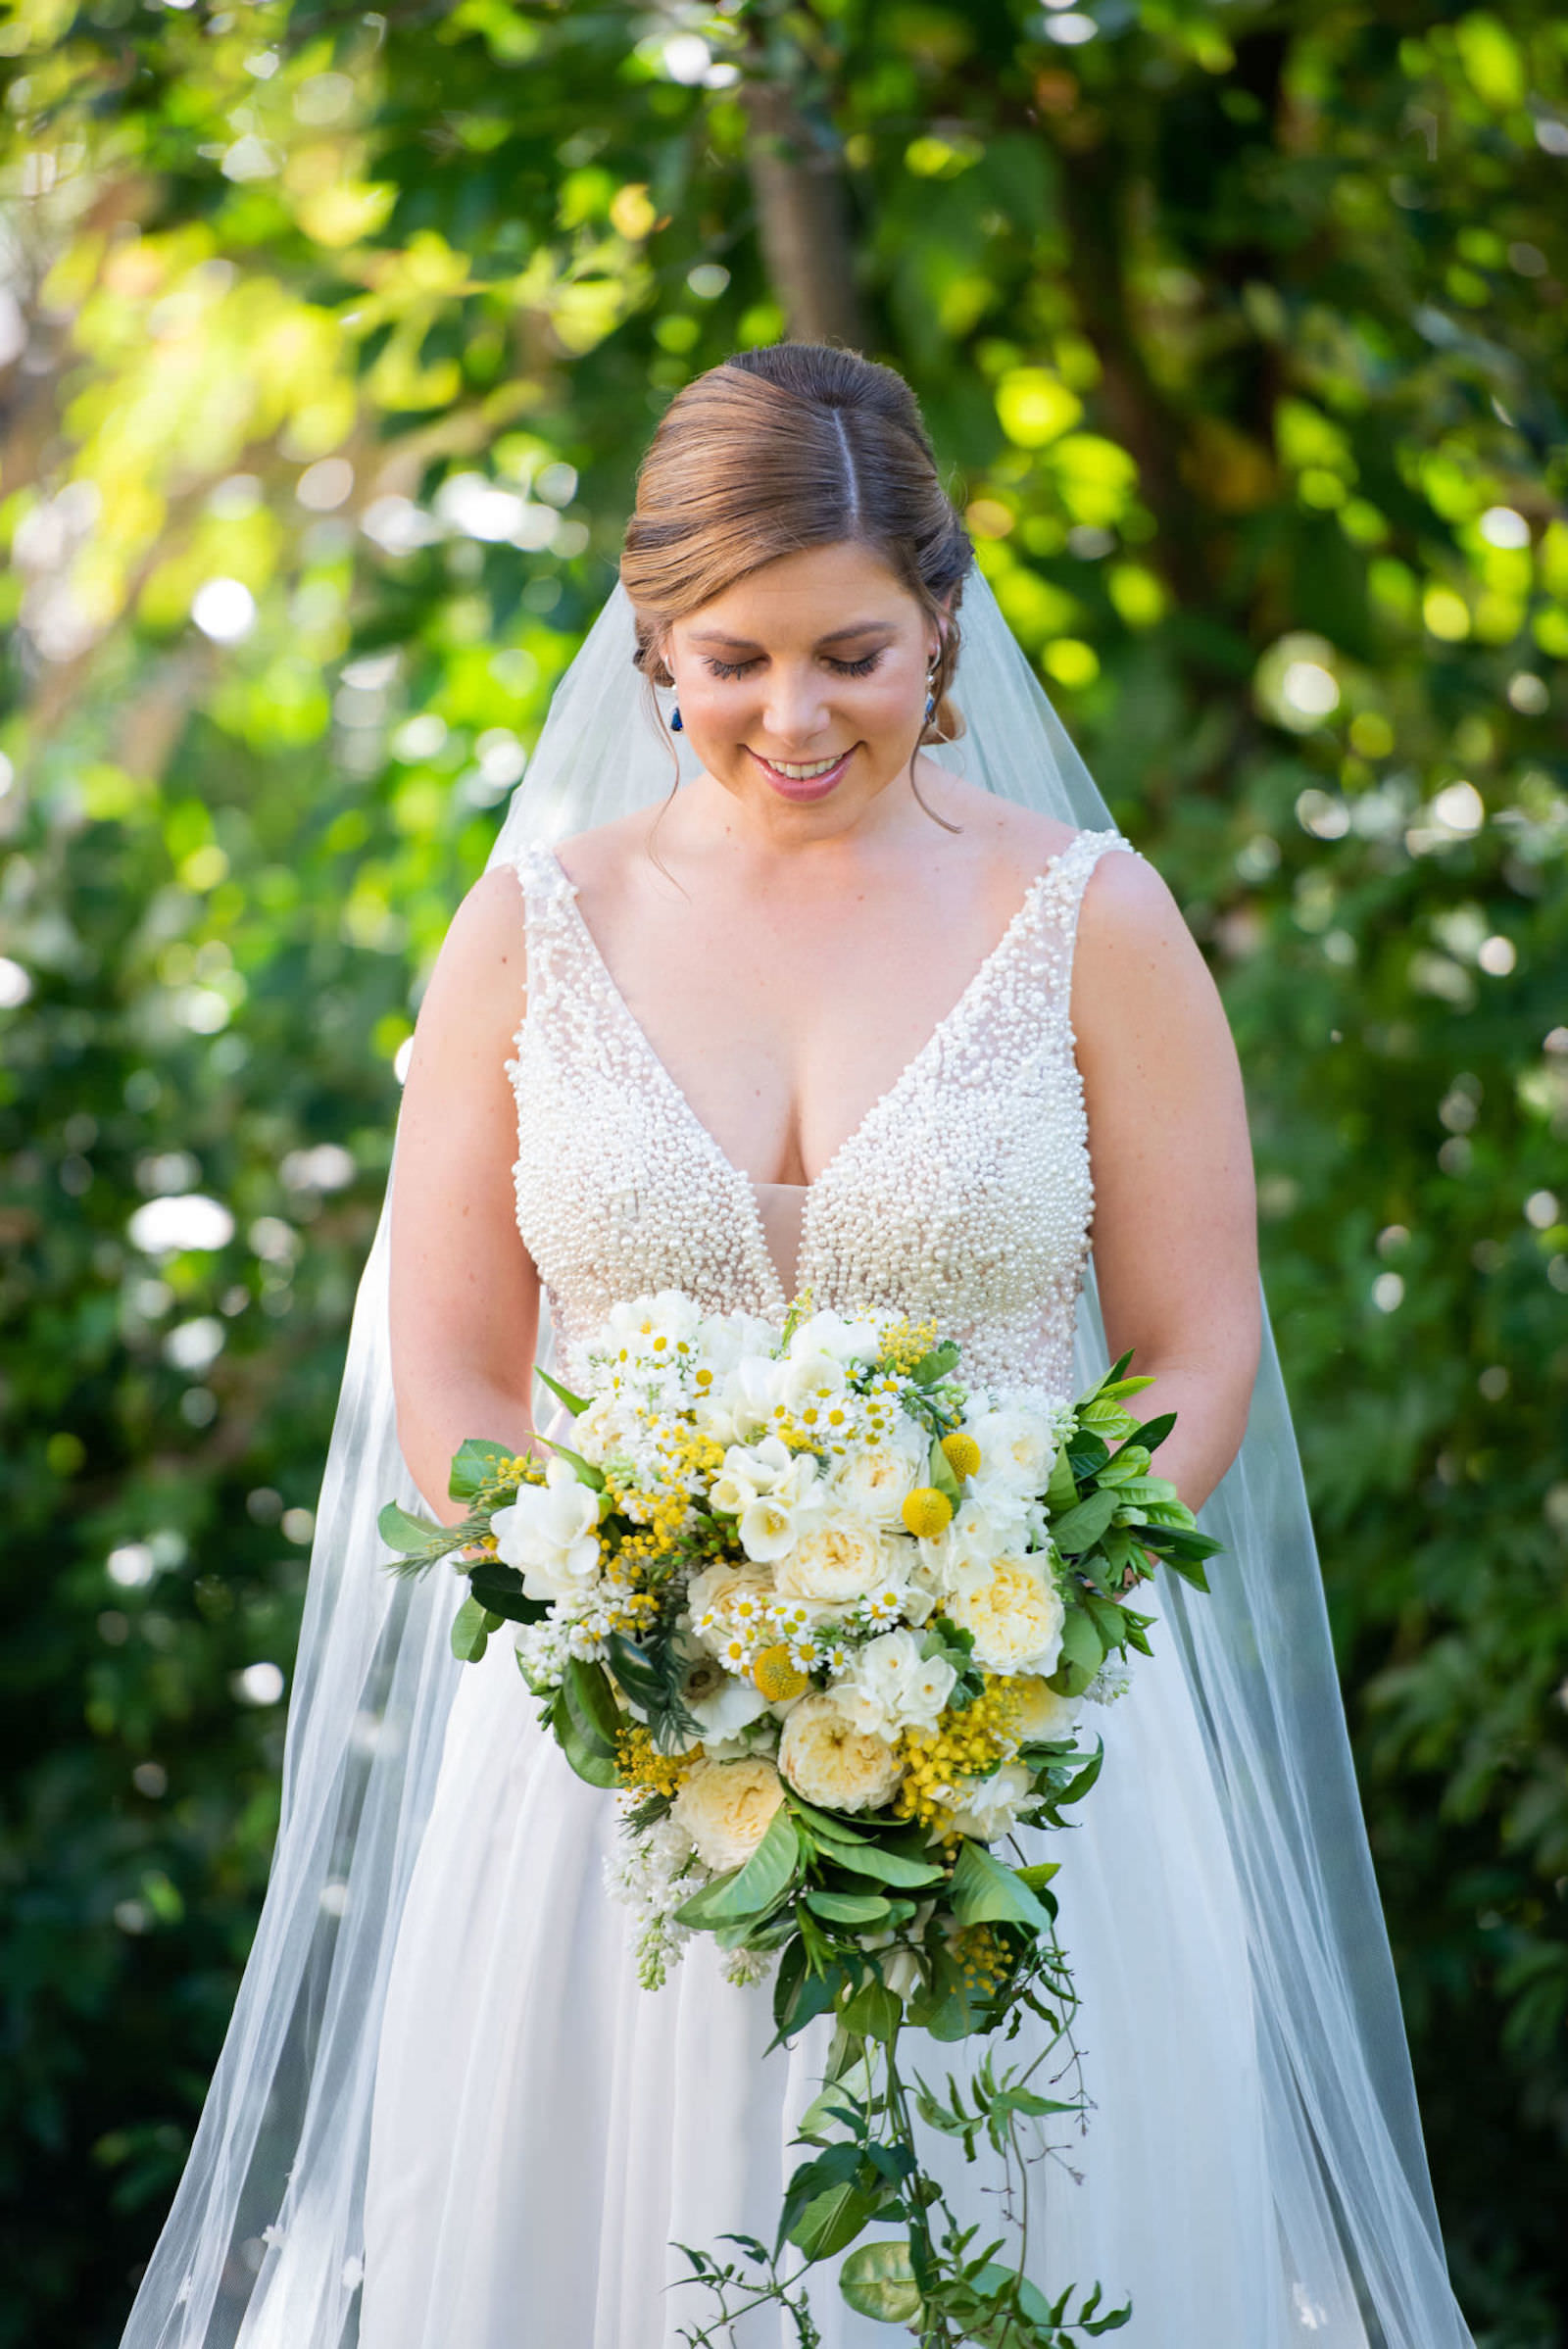 Romantic Bride in Plunging V Neckline Rhinestone Bodice and Flowy Skirt Wedding Dress Holding Garden Whimsicaly Yellow Roses, White and Greenery Floral Bouquet